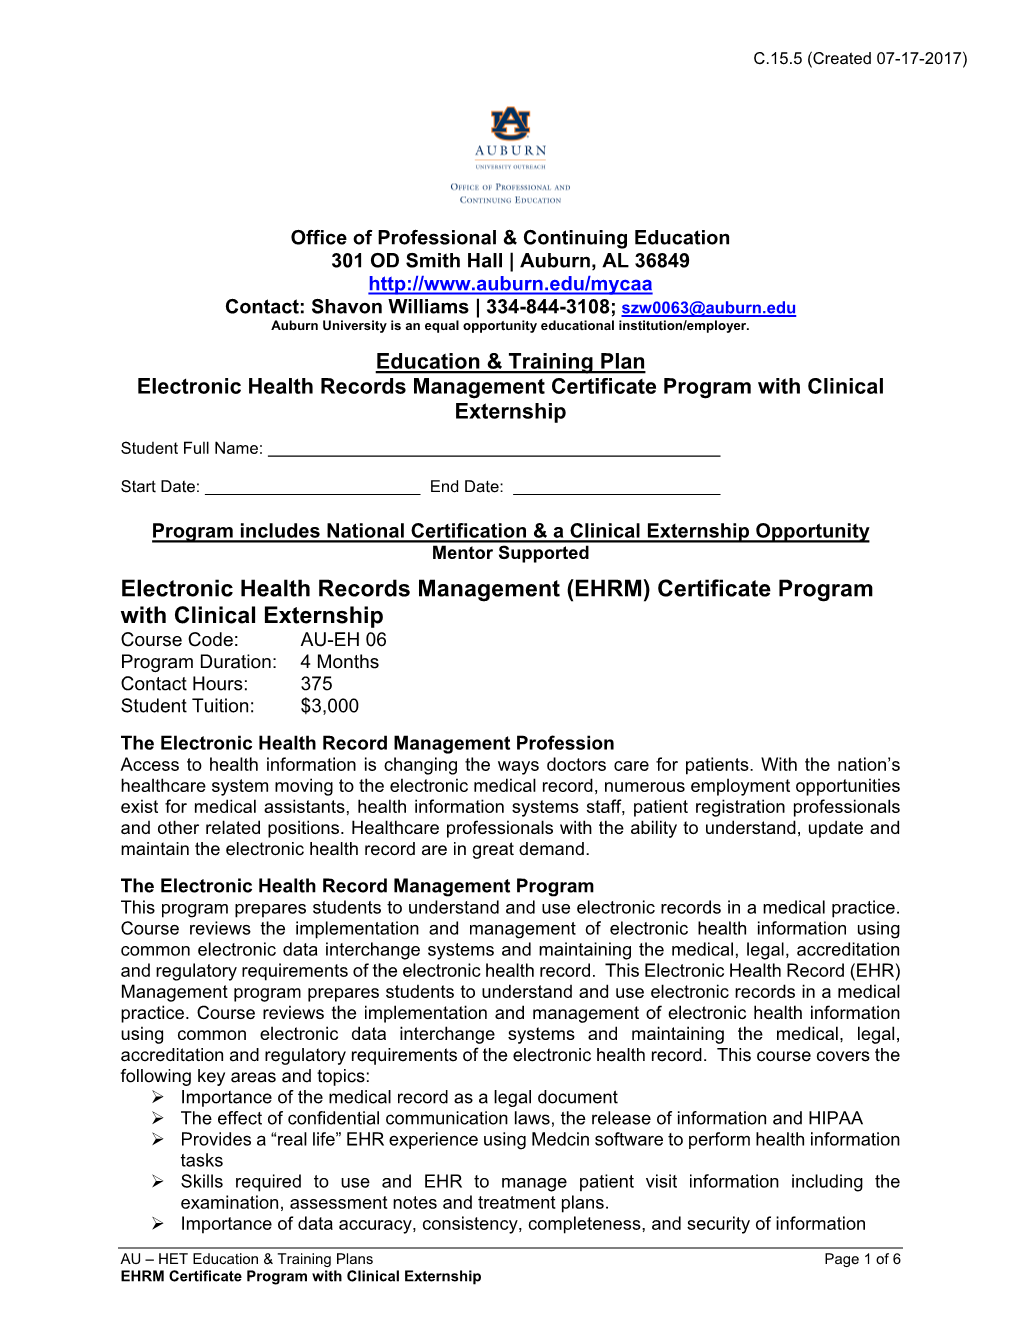 EHRM Certificate Program with Clinical Externship C5 (Created 9/3/15)